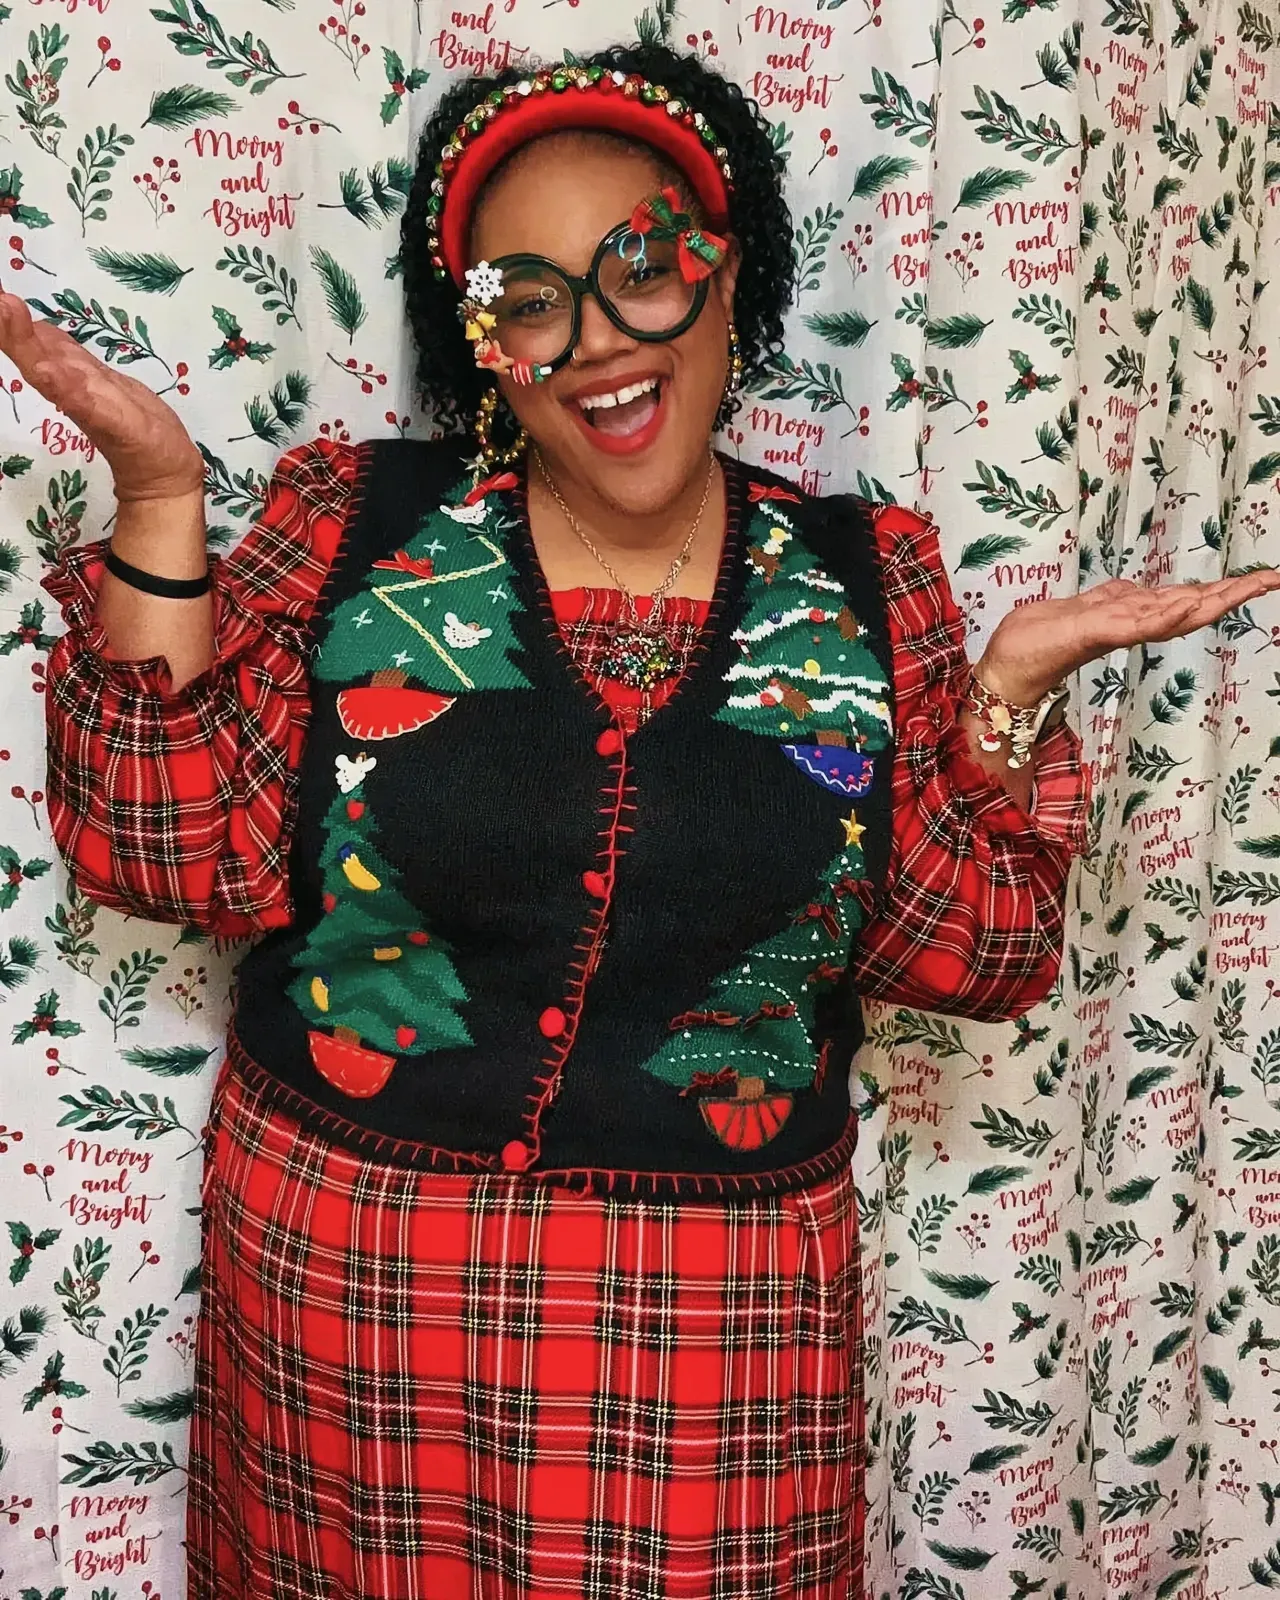 Woman wearing a Christmas-themed sweater with a tartan pattern and glasses